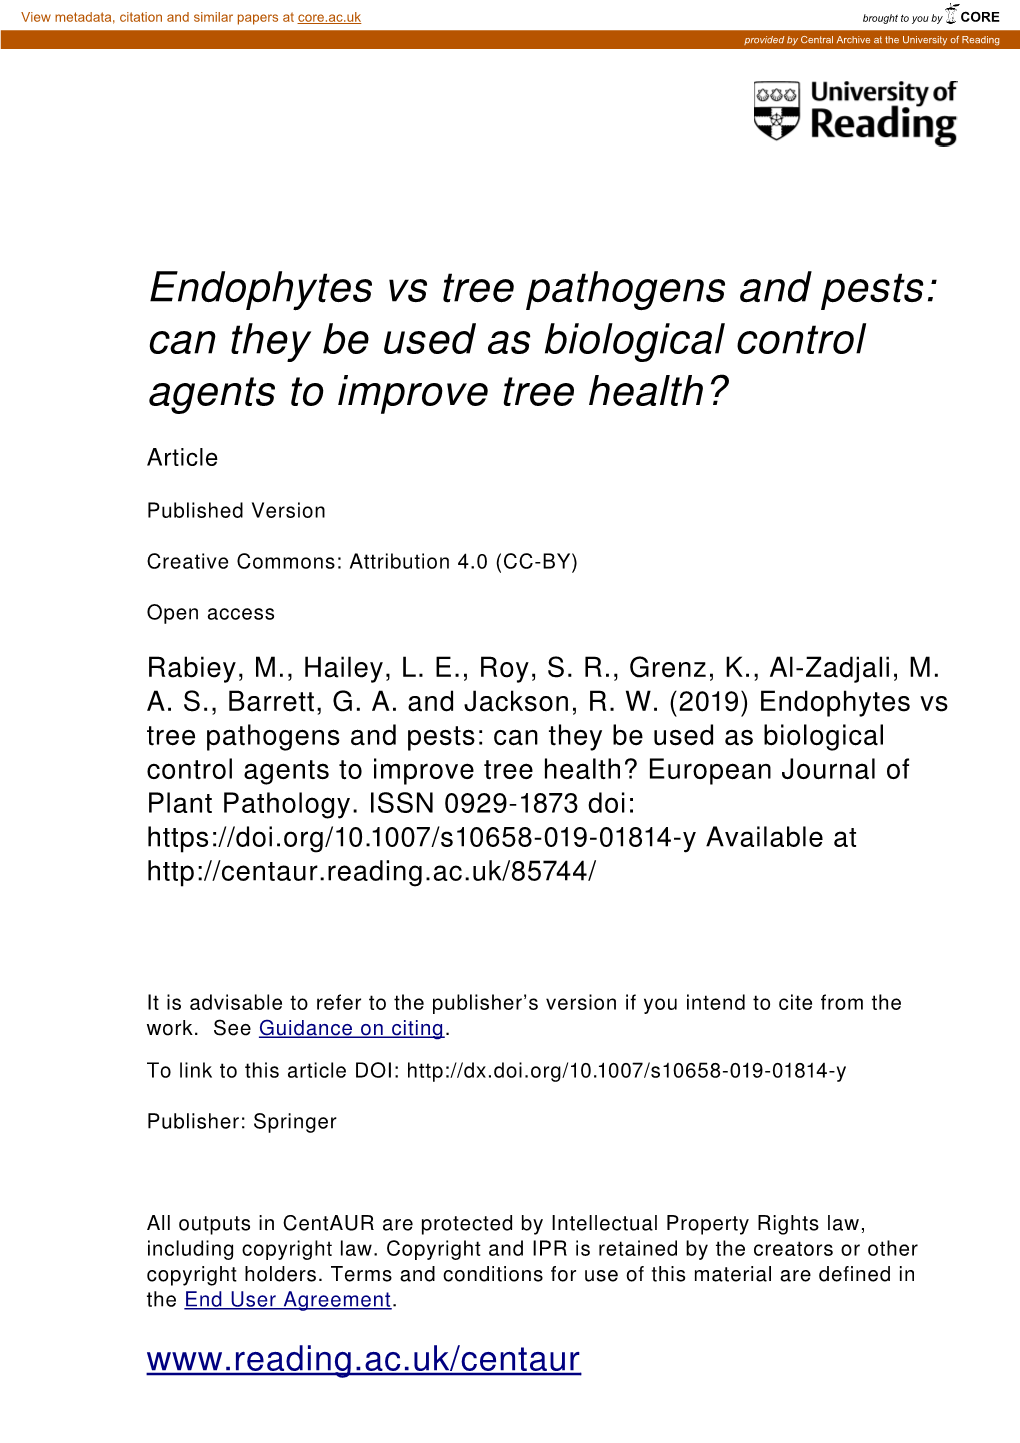 Endophytes Vs Tree Pathogens and Pests: Can They Be Used As Biological Control Agents to Improve Tree Health?